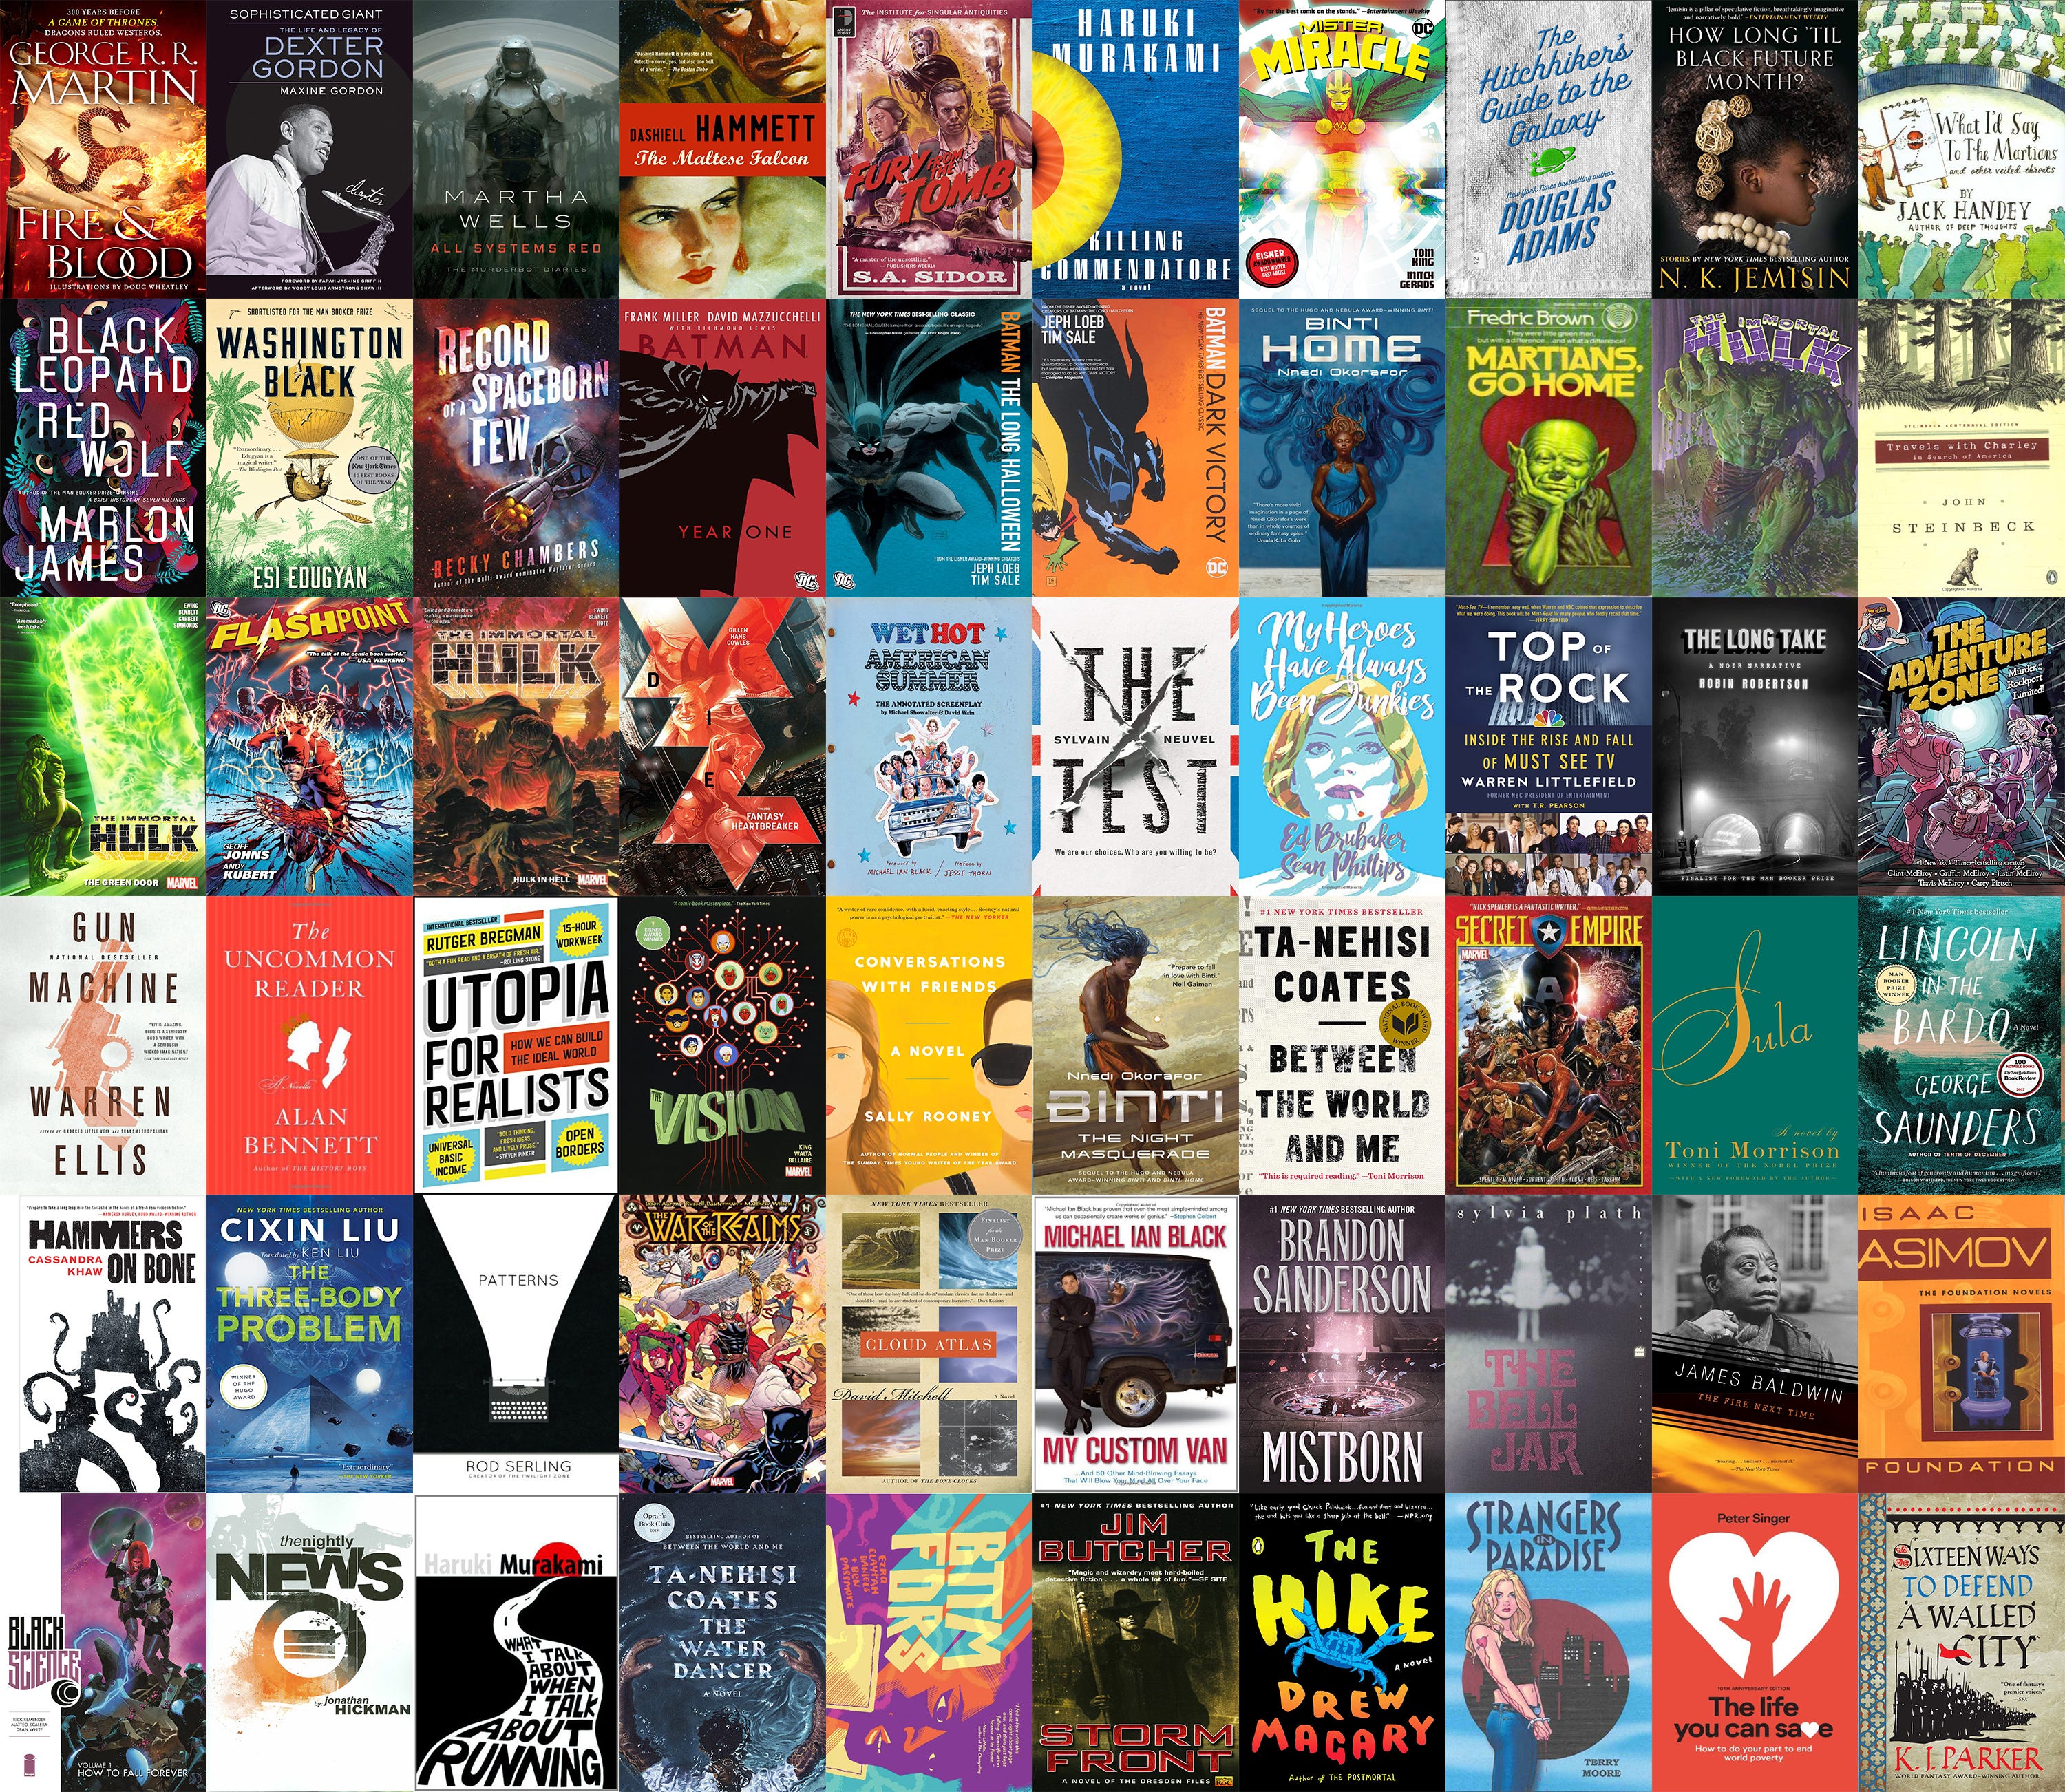 The 60 Books I Read This Year, Each Reviewed in 60 Words or Fewer by Jake Christie Medium